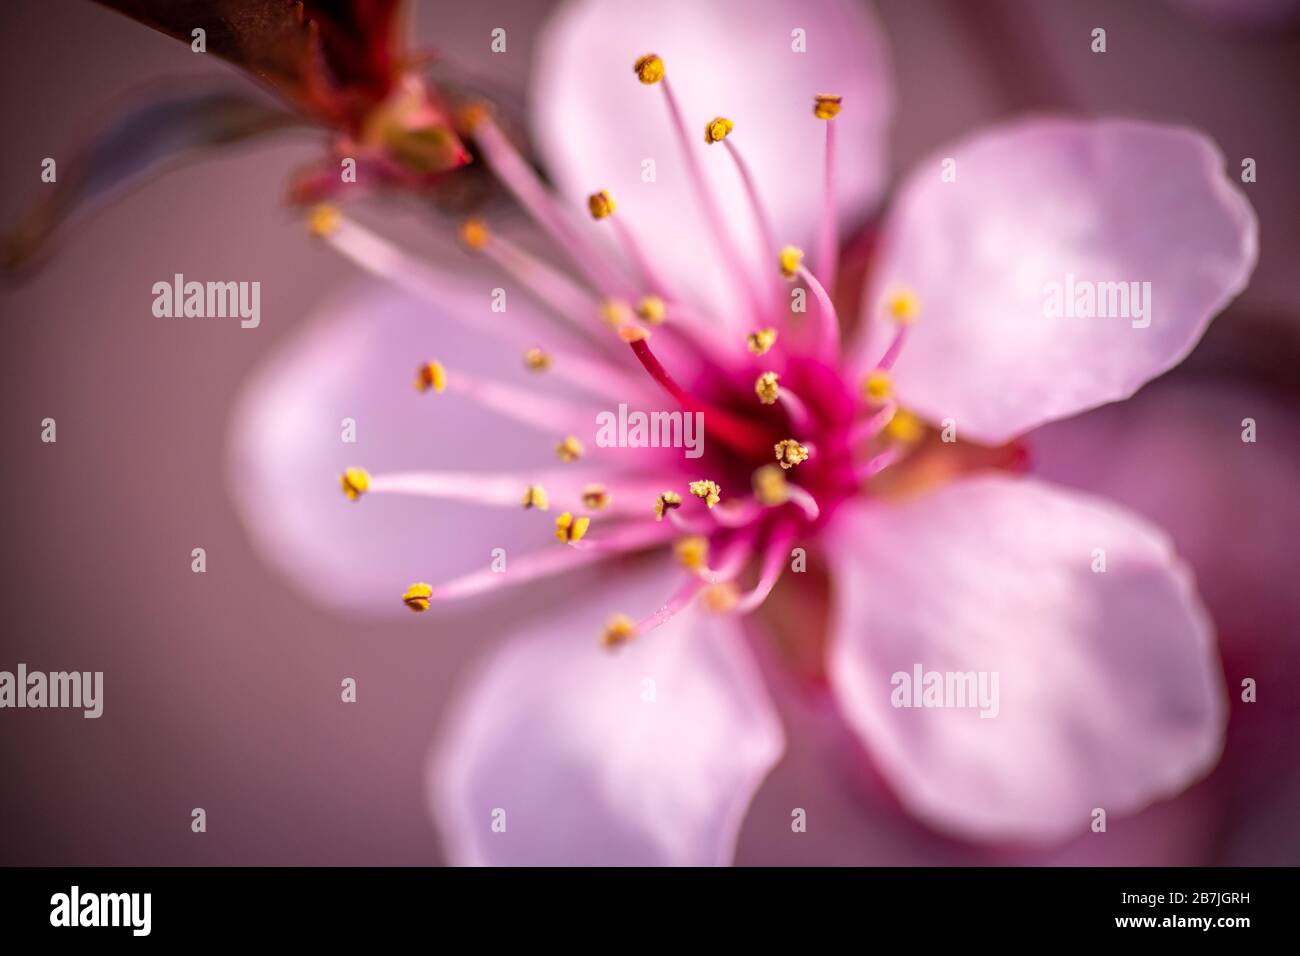 Beautiful macro image of the flower of the prunus cerasifera, blooming in the months of March and April with beautiful purple pink tones Stock Photo